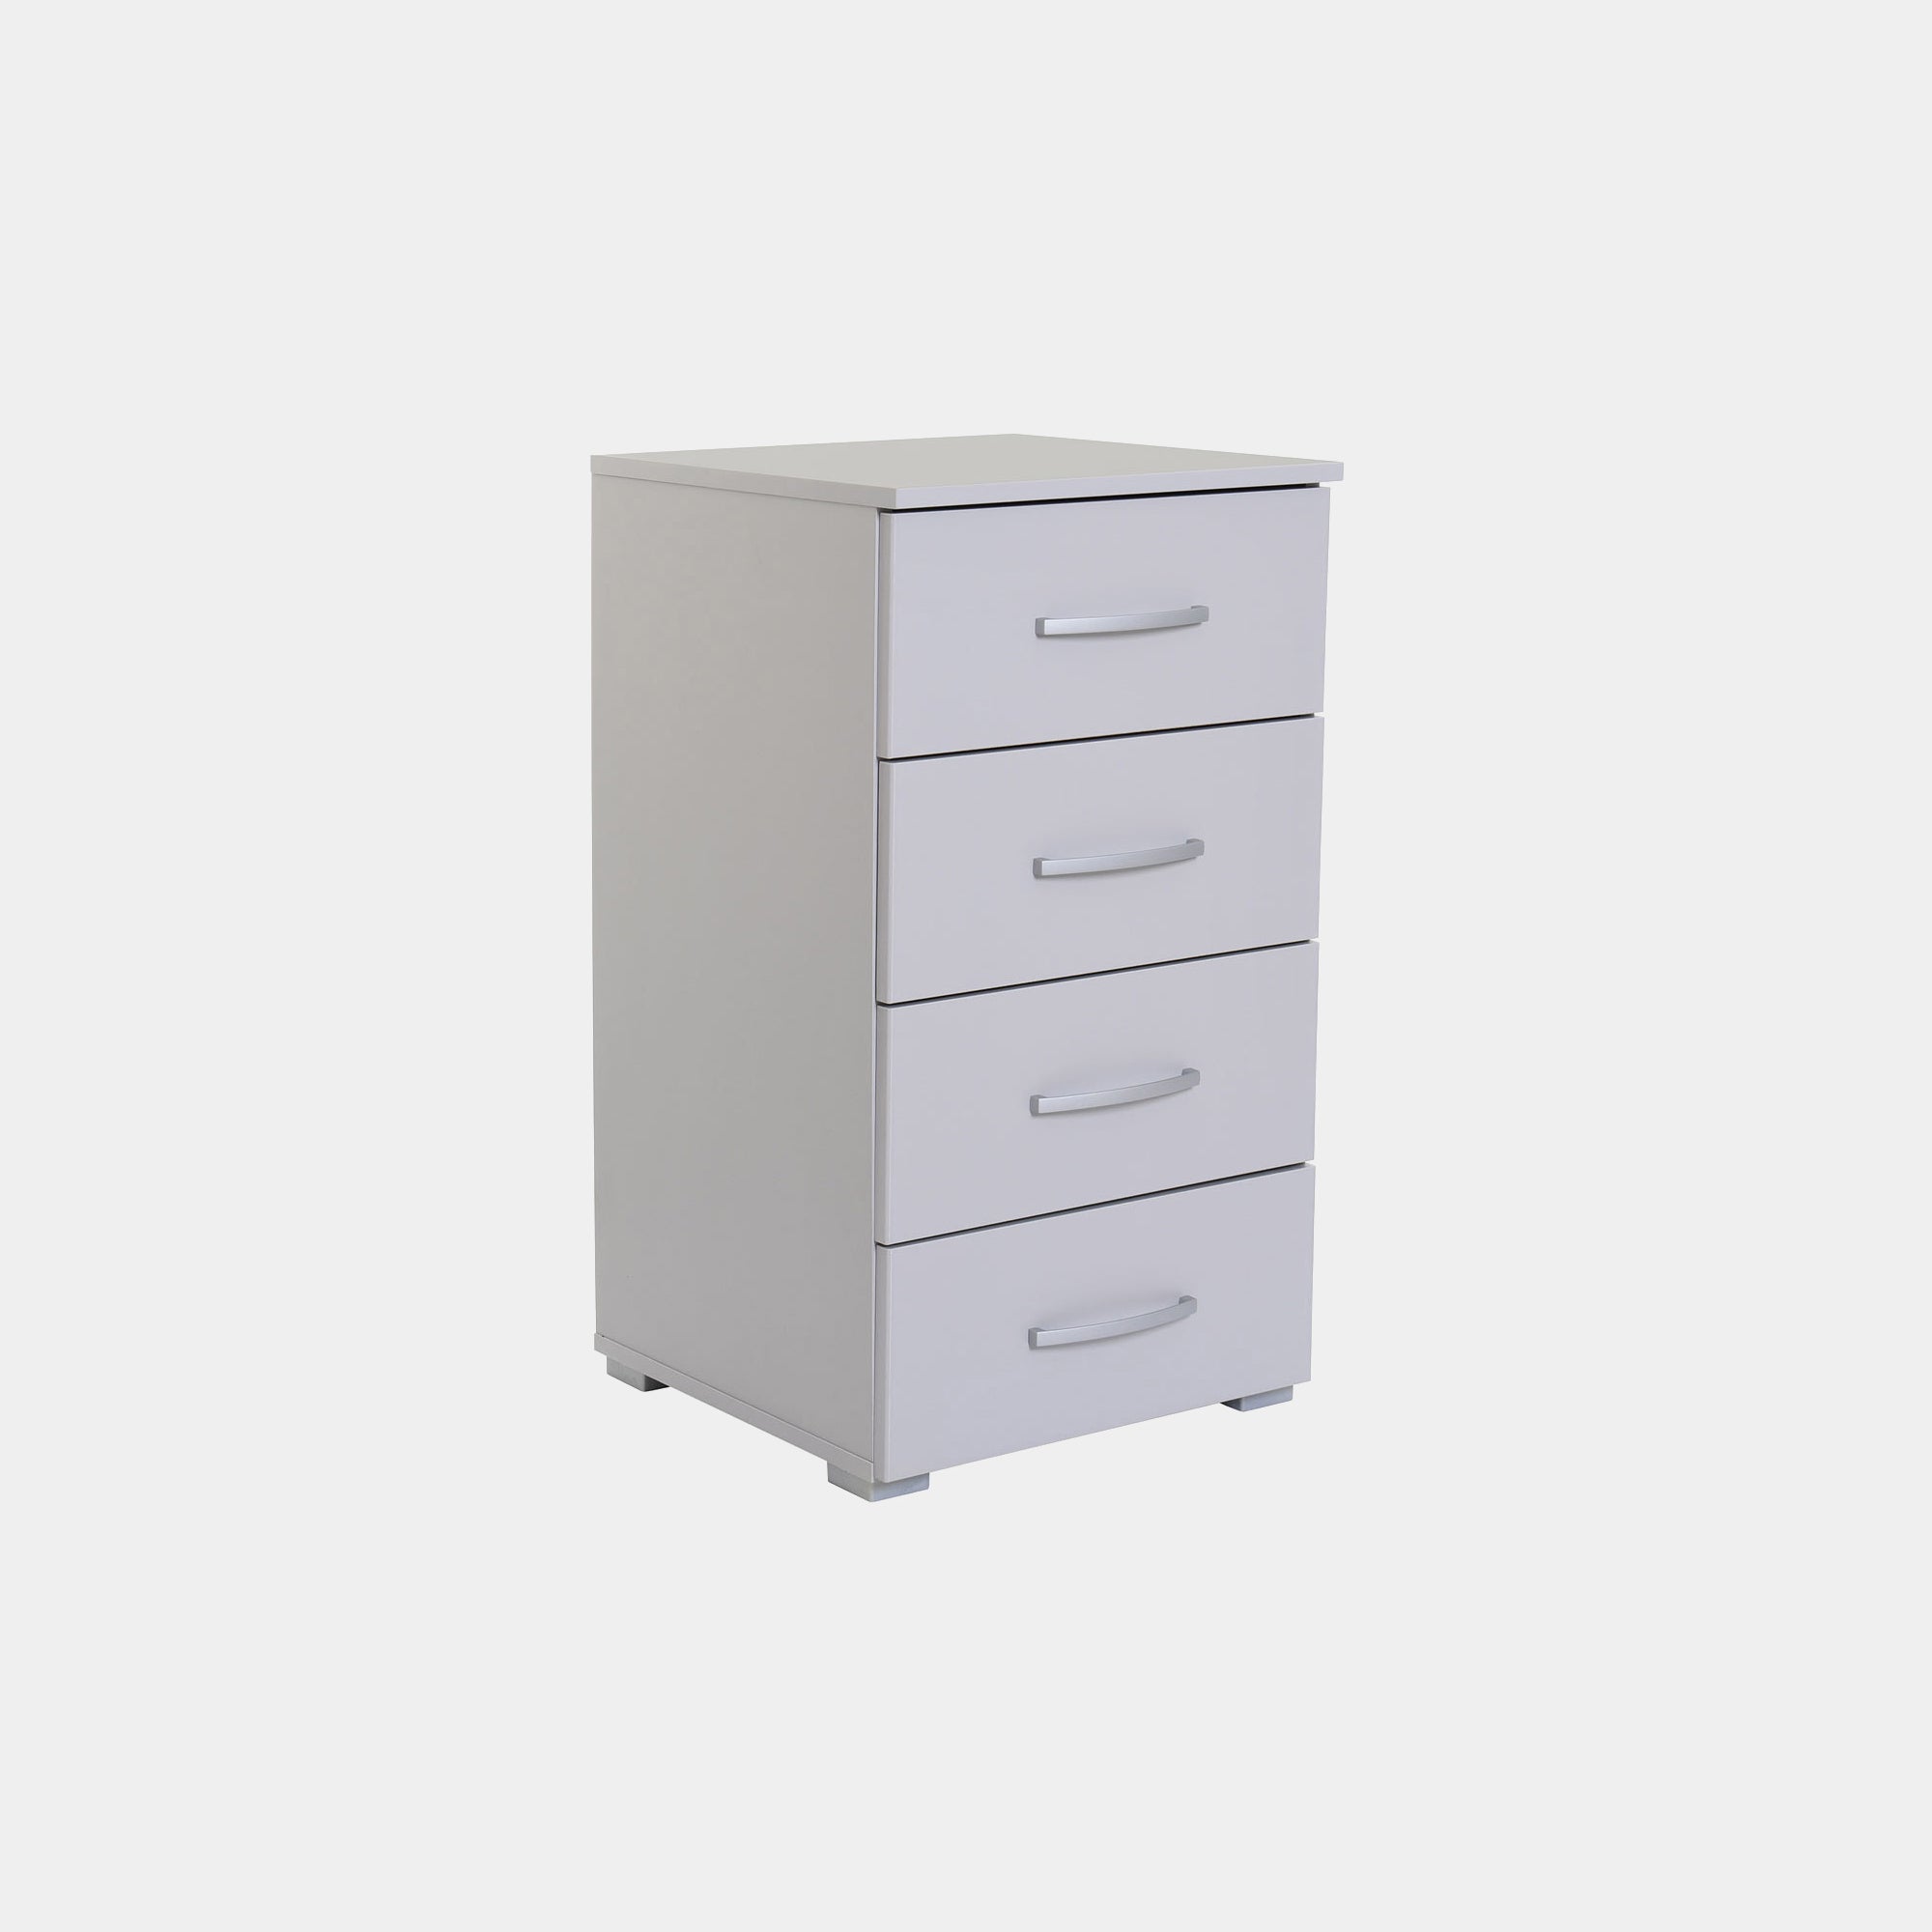 4 Narrow Drawer Chest  Supplied Packed Flat